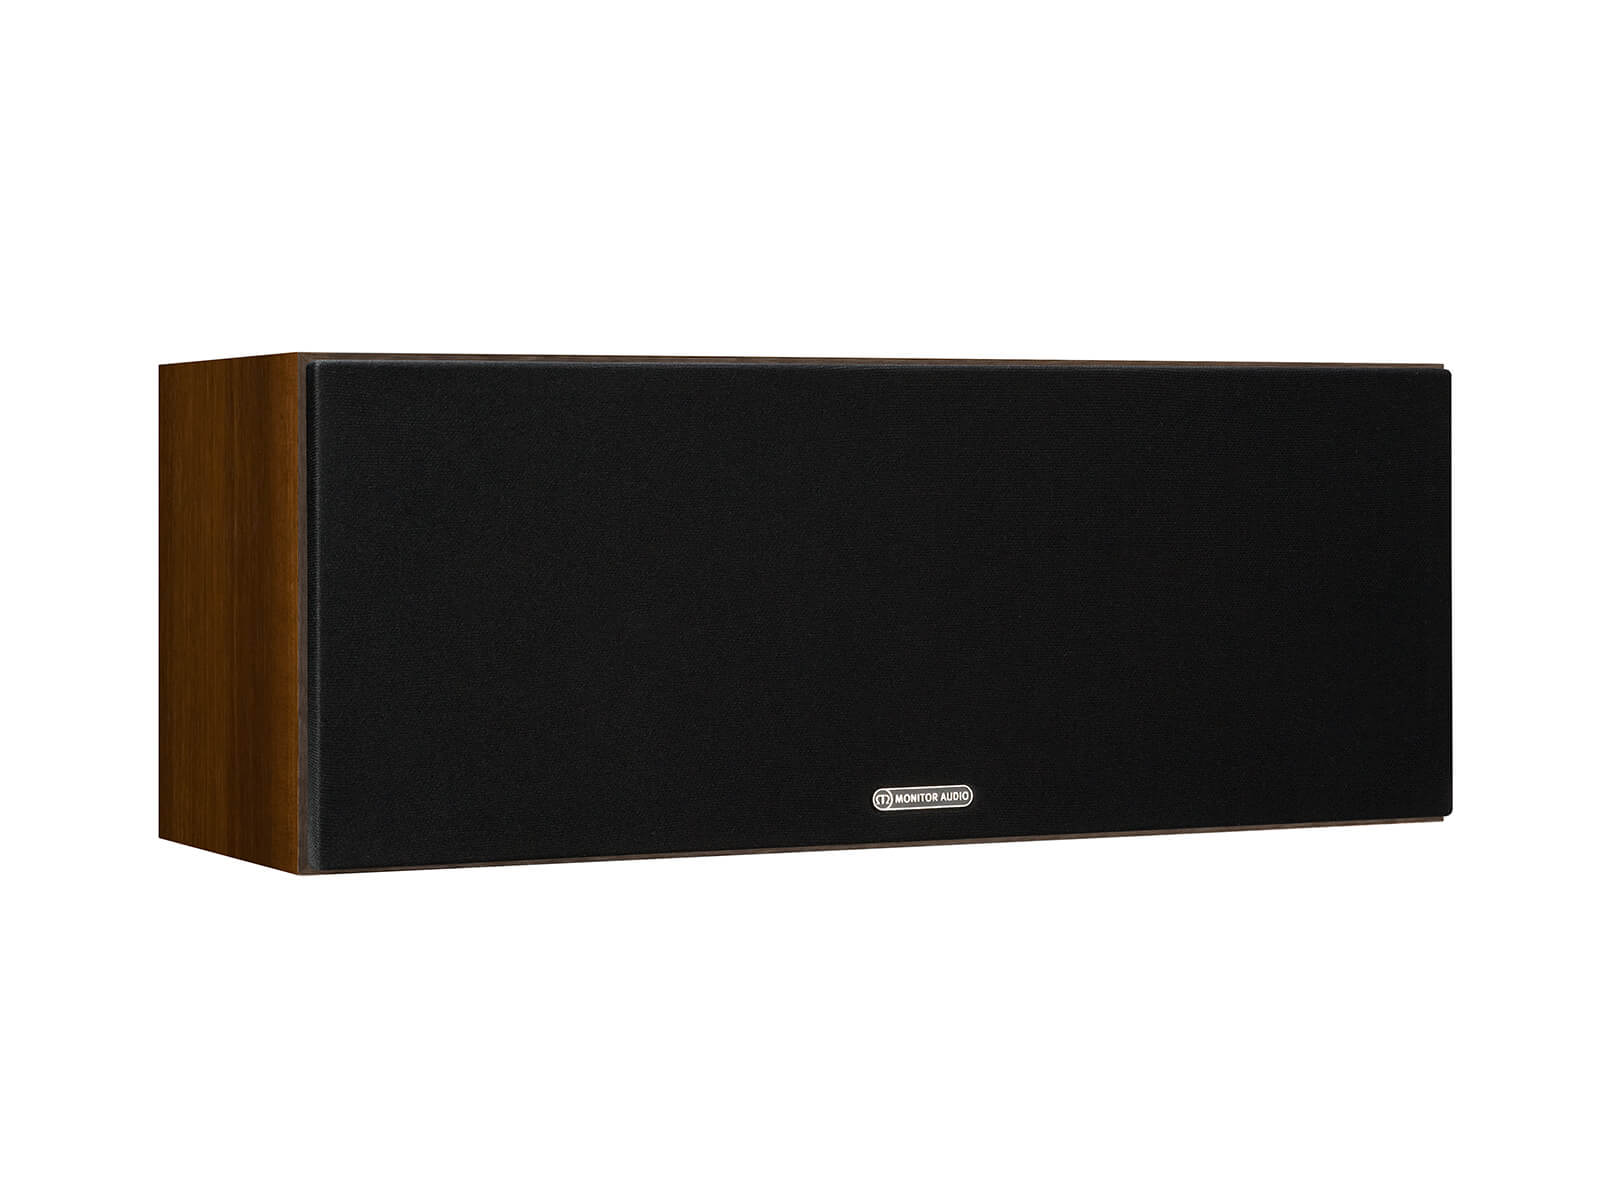 Monitor C150, centre channel speakers, featuring a grille, with a walnut vinyl finish.